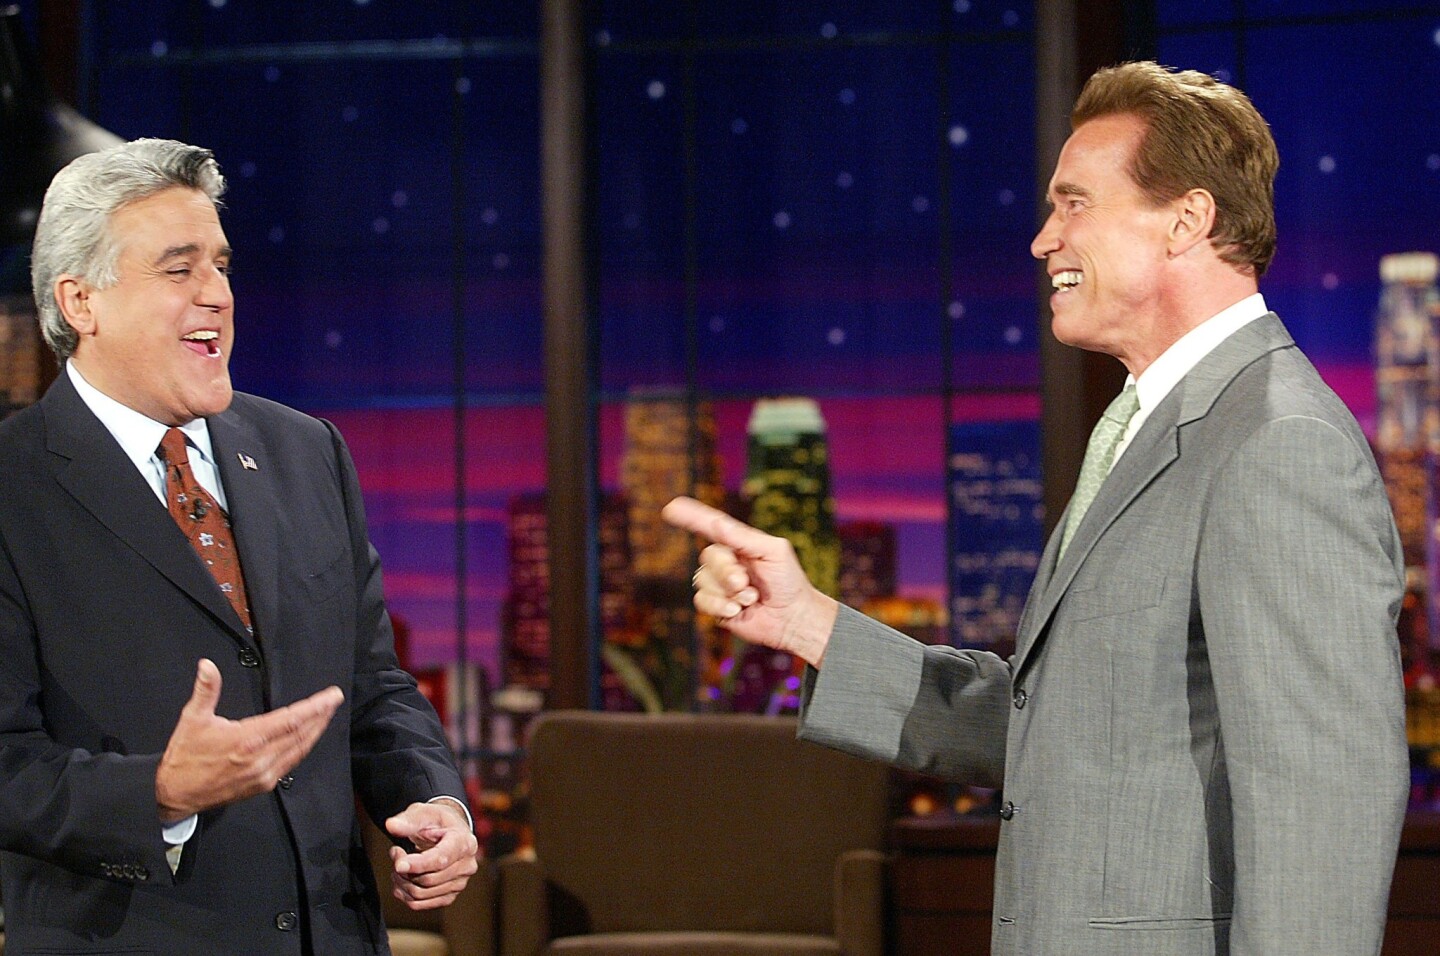 2. Republican Arnold Schwarzenegger announced his candidacy for governor on Jay Leno's "Tonight Show," catching many of his political advisors off-guard. Previously Schwarzenegger had been eying a run in 2006, the next scheduled election year. Issa, who had hoped to run, quickly stepped aside. This Oct. 8, 2003, photo shows Leno and Gov.-elect Schwarzenegger the day after the recall election.